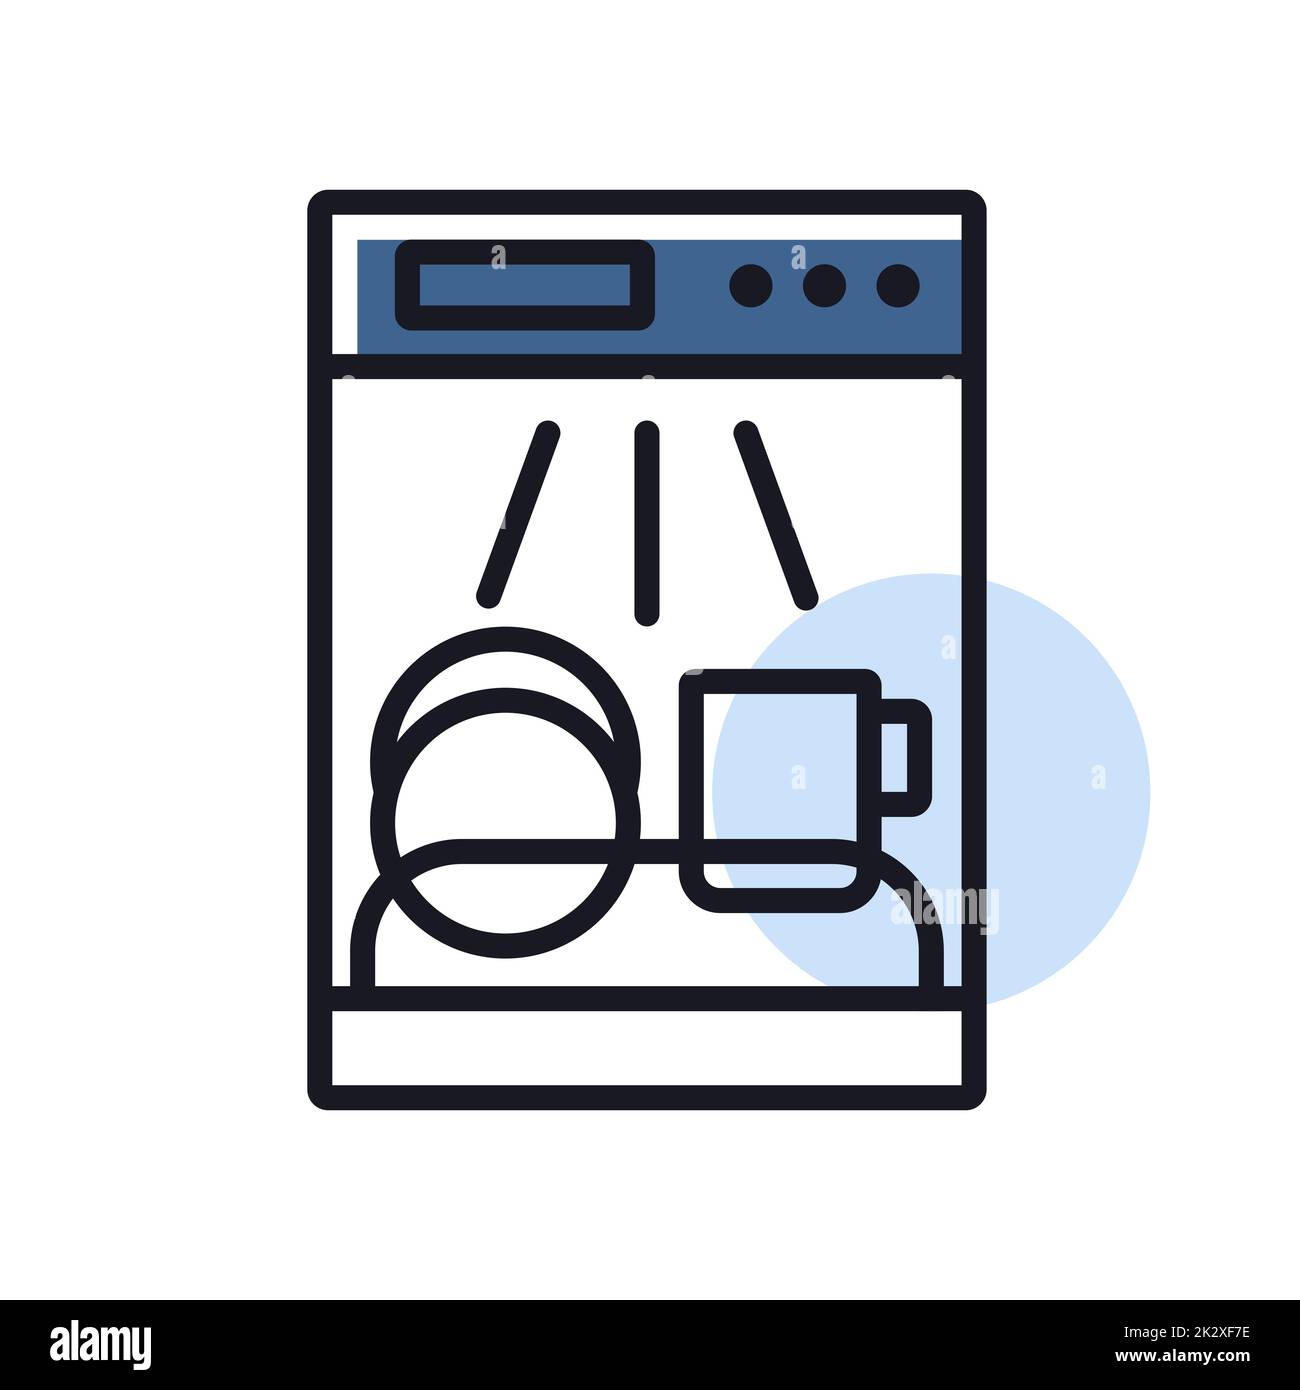 Dish Washing Equipment, Dirty and Clean Dishes, Kitchen Utensils,  Detergents, Dinnerware in Sink. Set of Flat Style Stock Vector -  Illustration of kitchenware, icon: 187040859